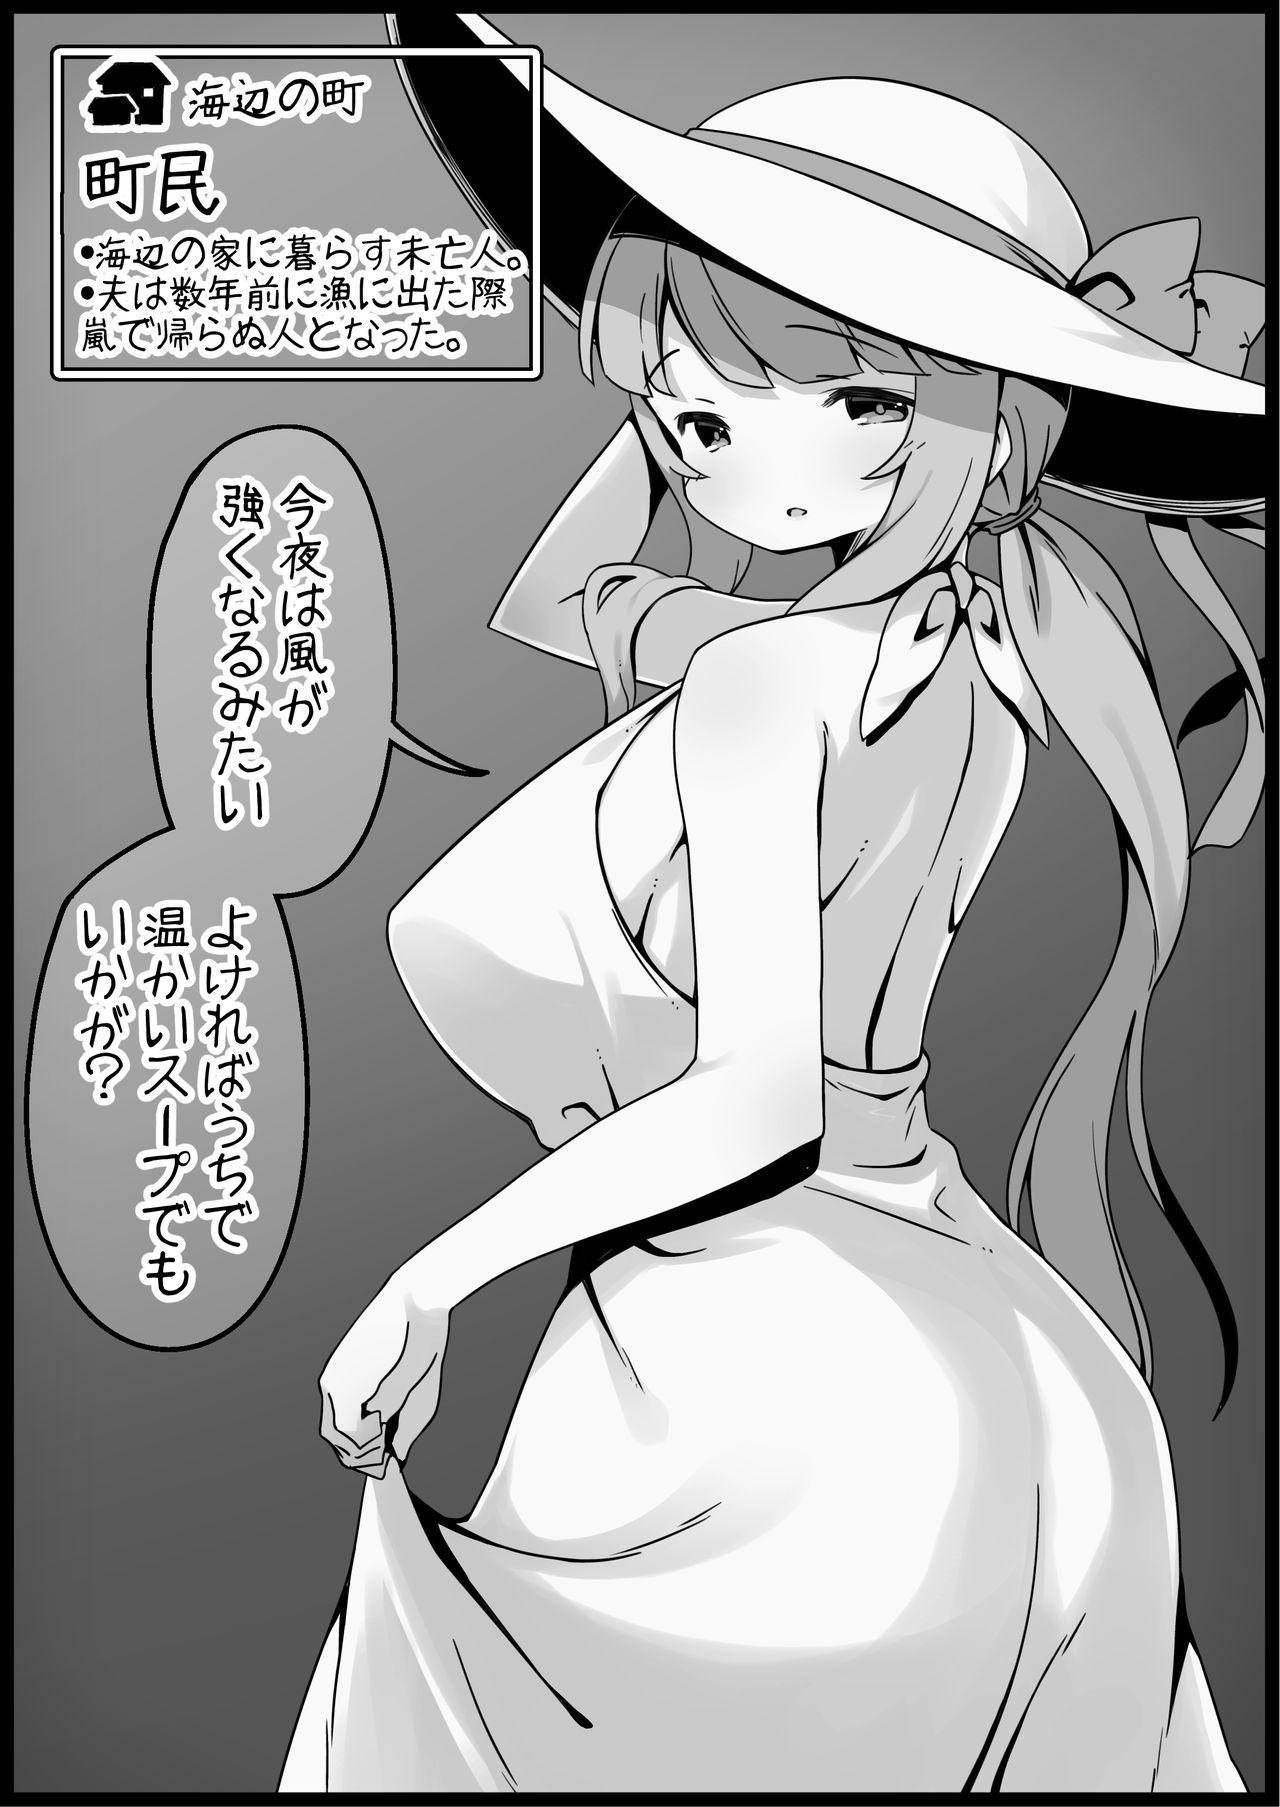 Cam Sex [Succubus Egg] Fantasy World 2 Too Forgiving to Heroes-Continued NPC (mob) Opponent-Centered Short H Manga Collection- - Original Banho - Page 10